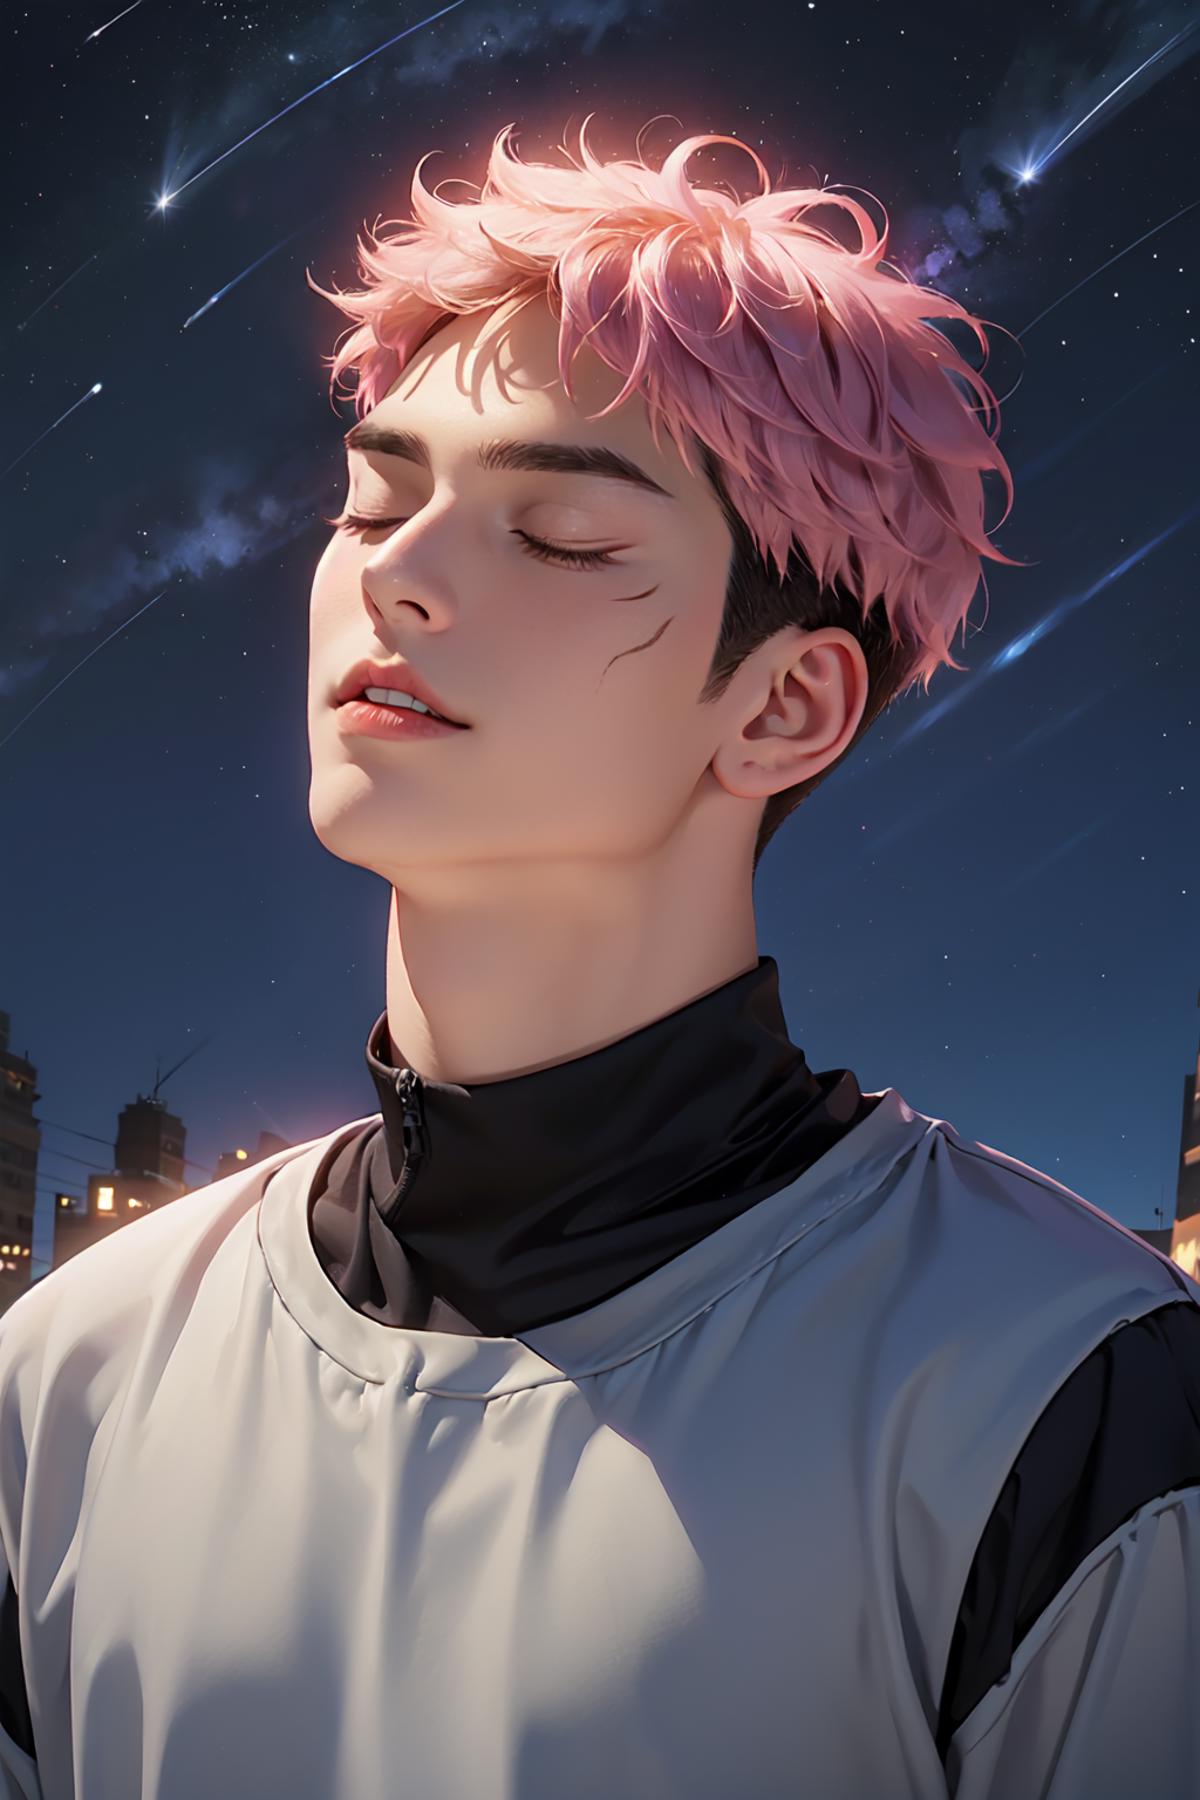 A young man with pink hair looking up into the night sky.